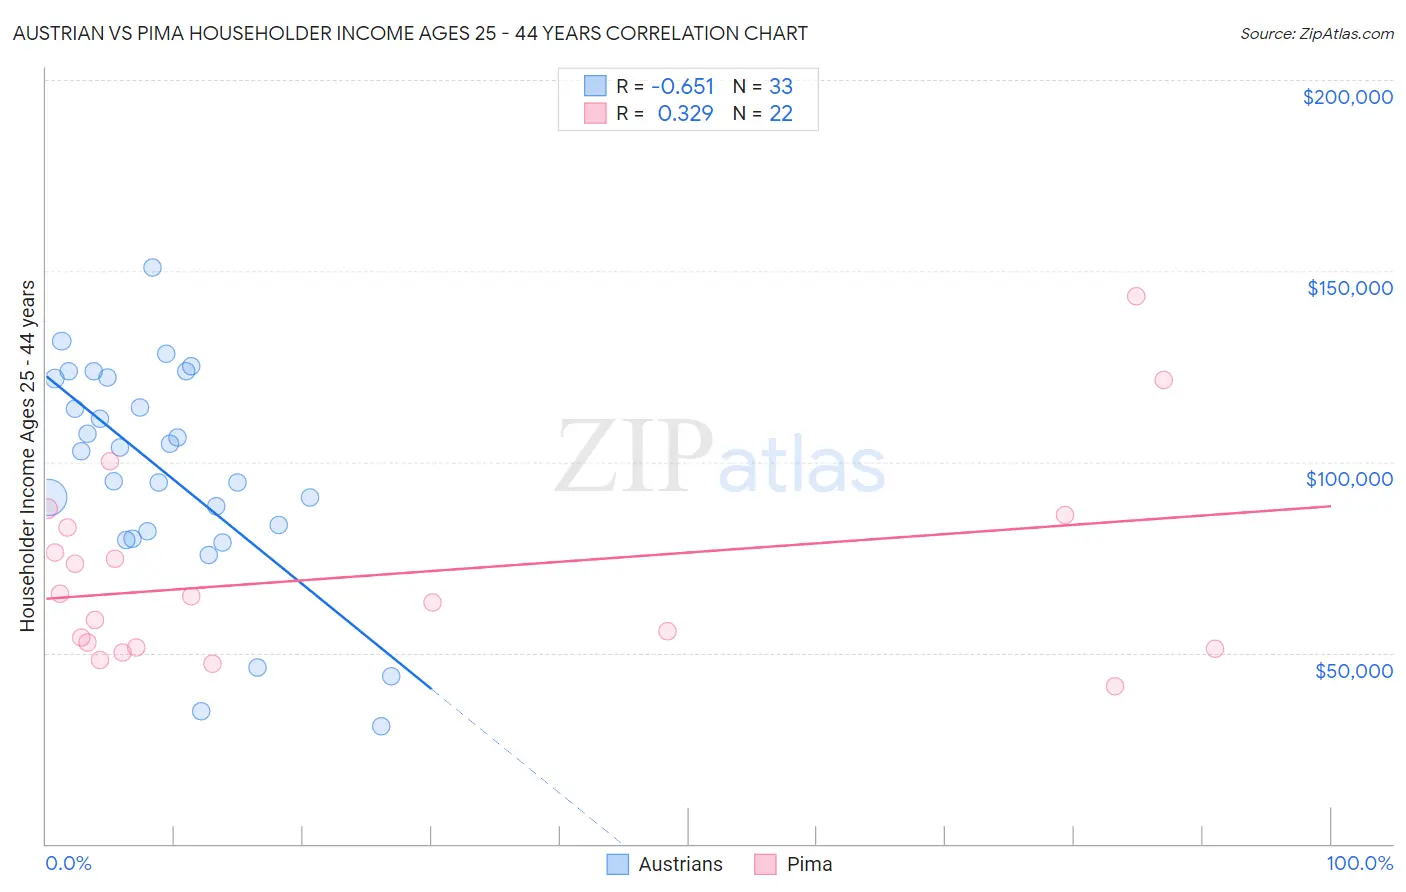 Austrian vs Pima Householder Income Ages 25 - 44 years